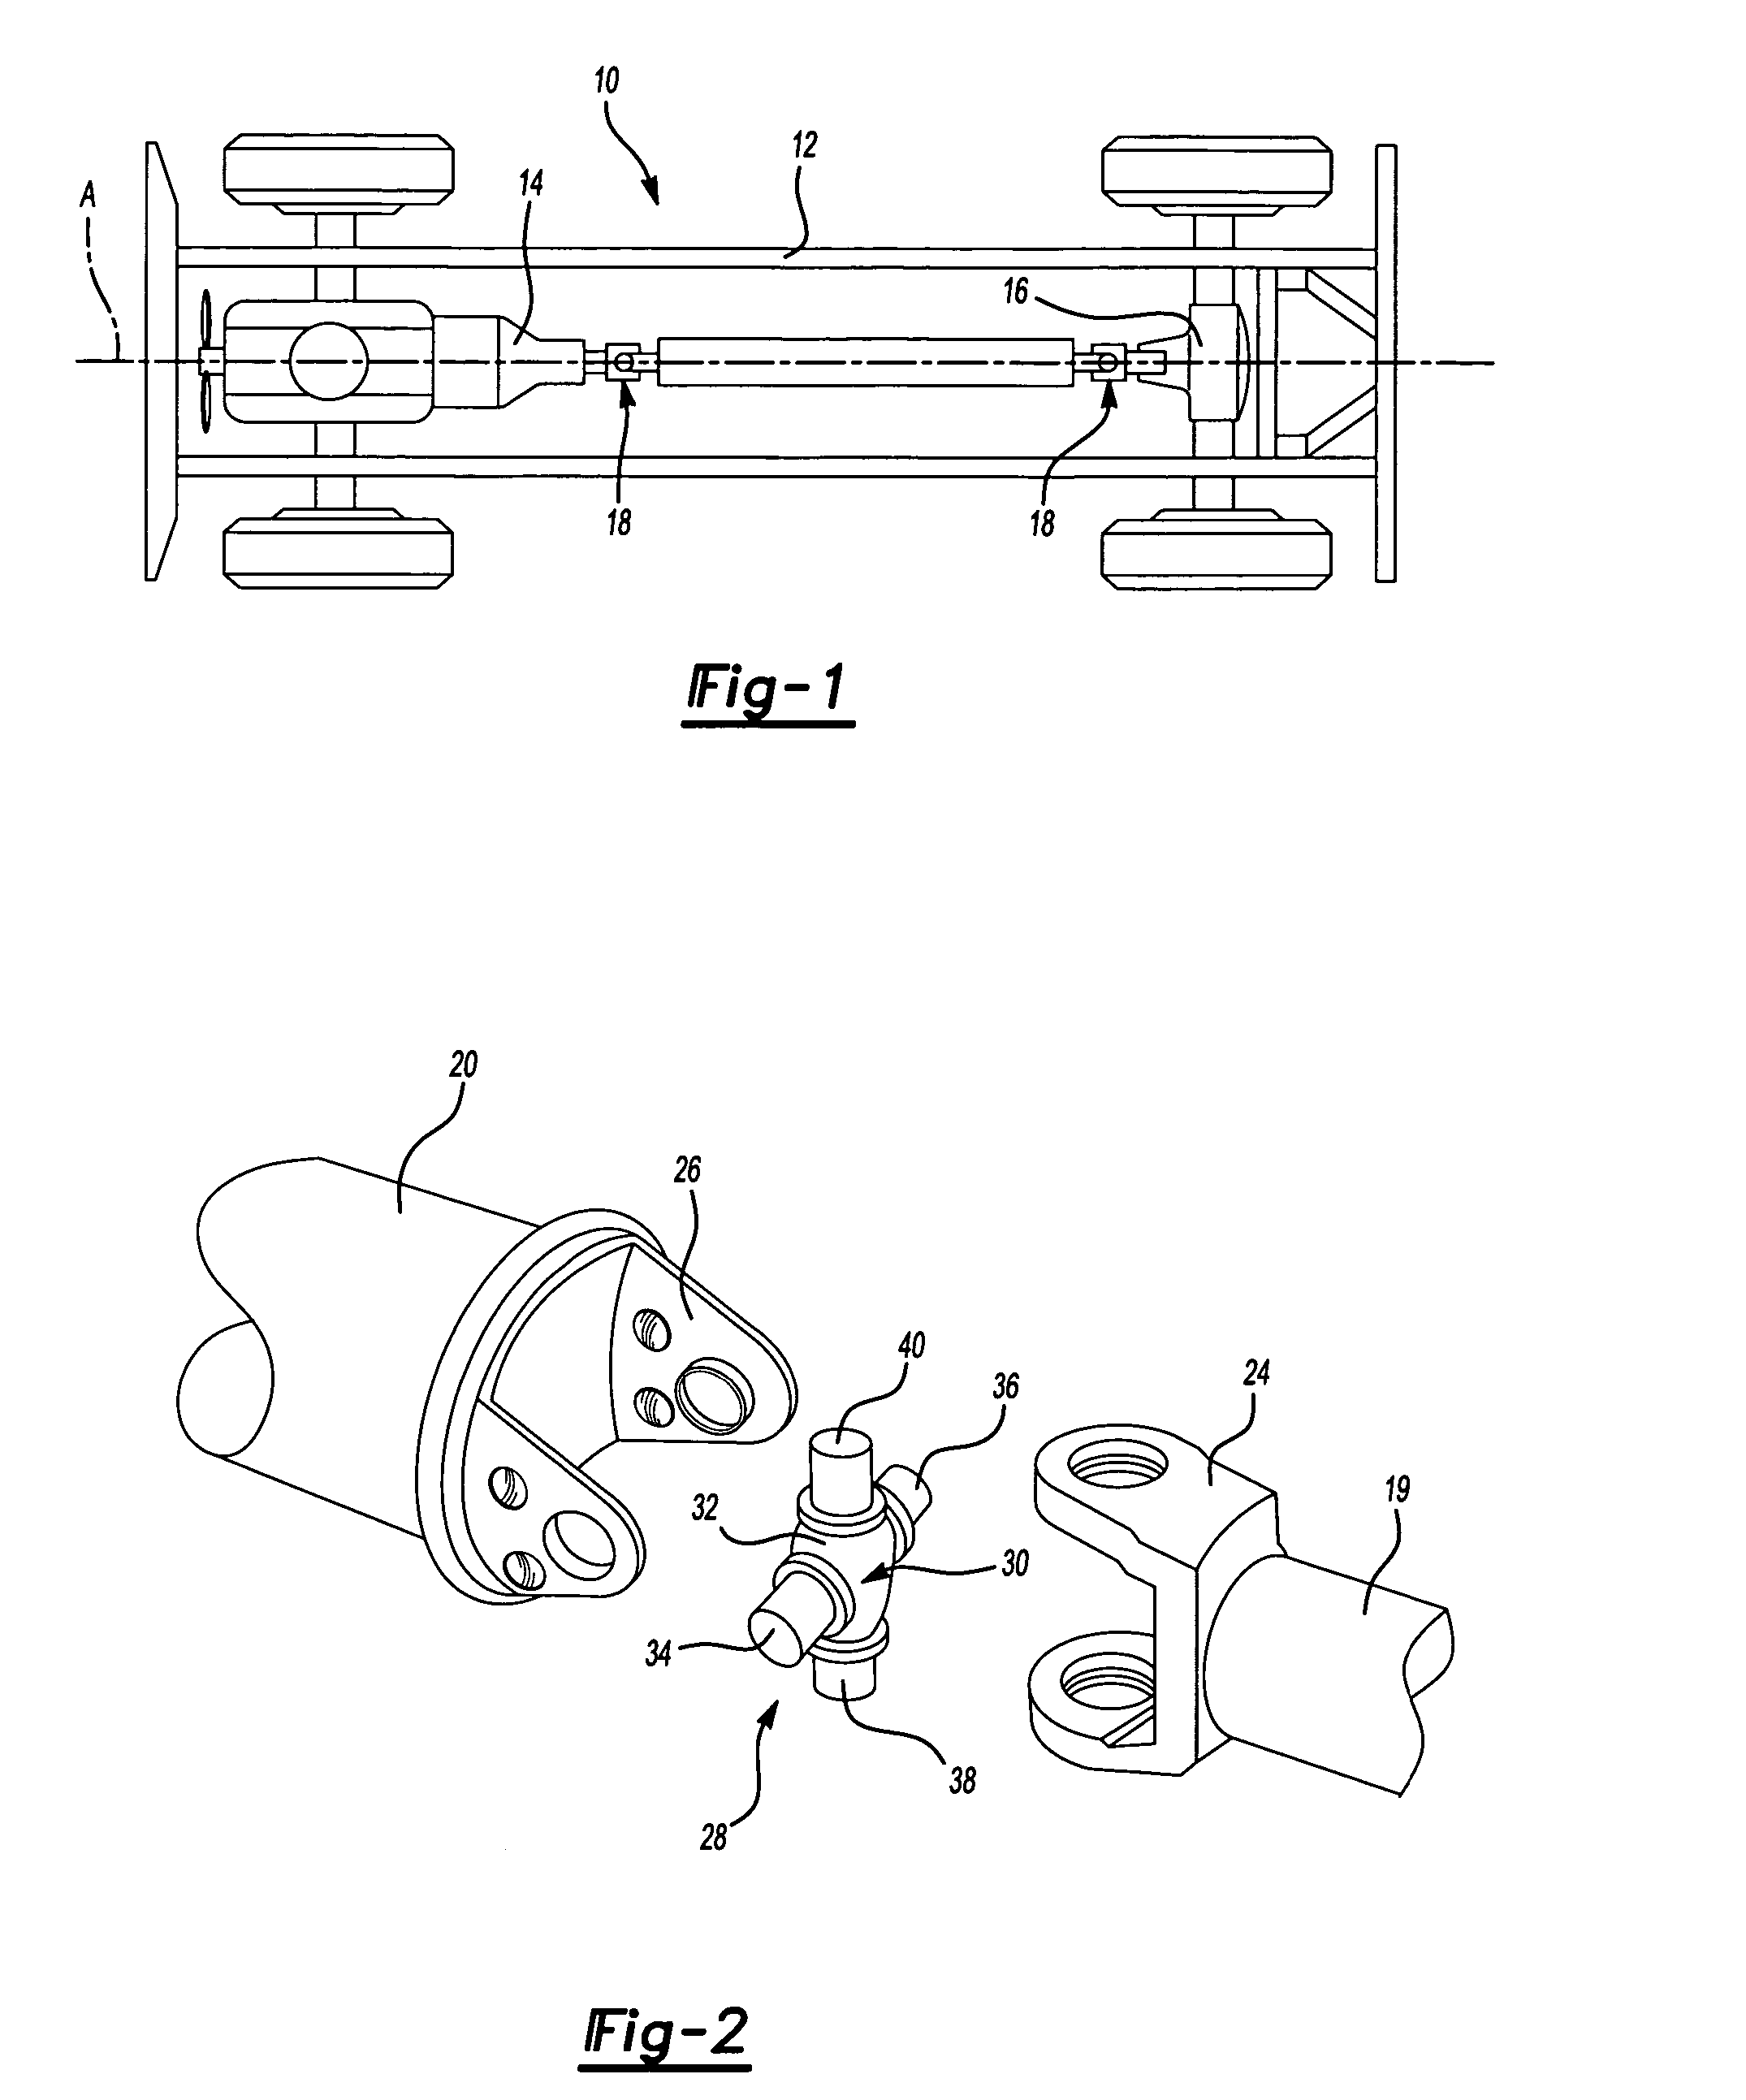 Universal joint assembly for an automotive driveline system